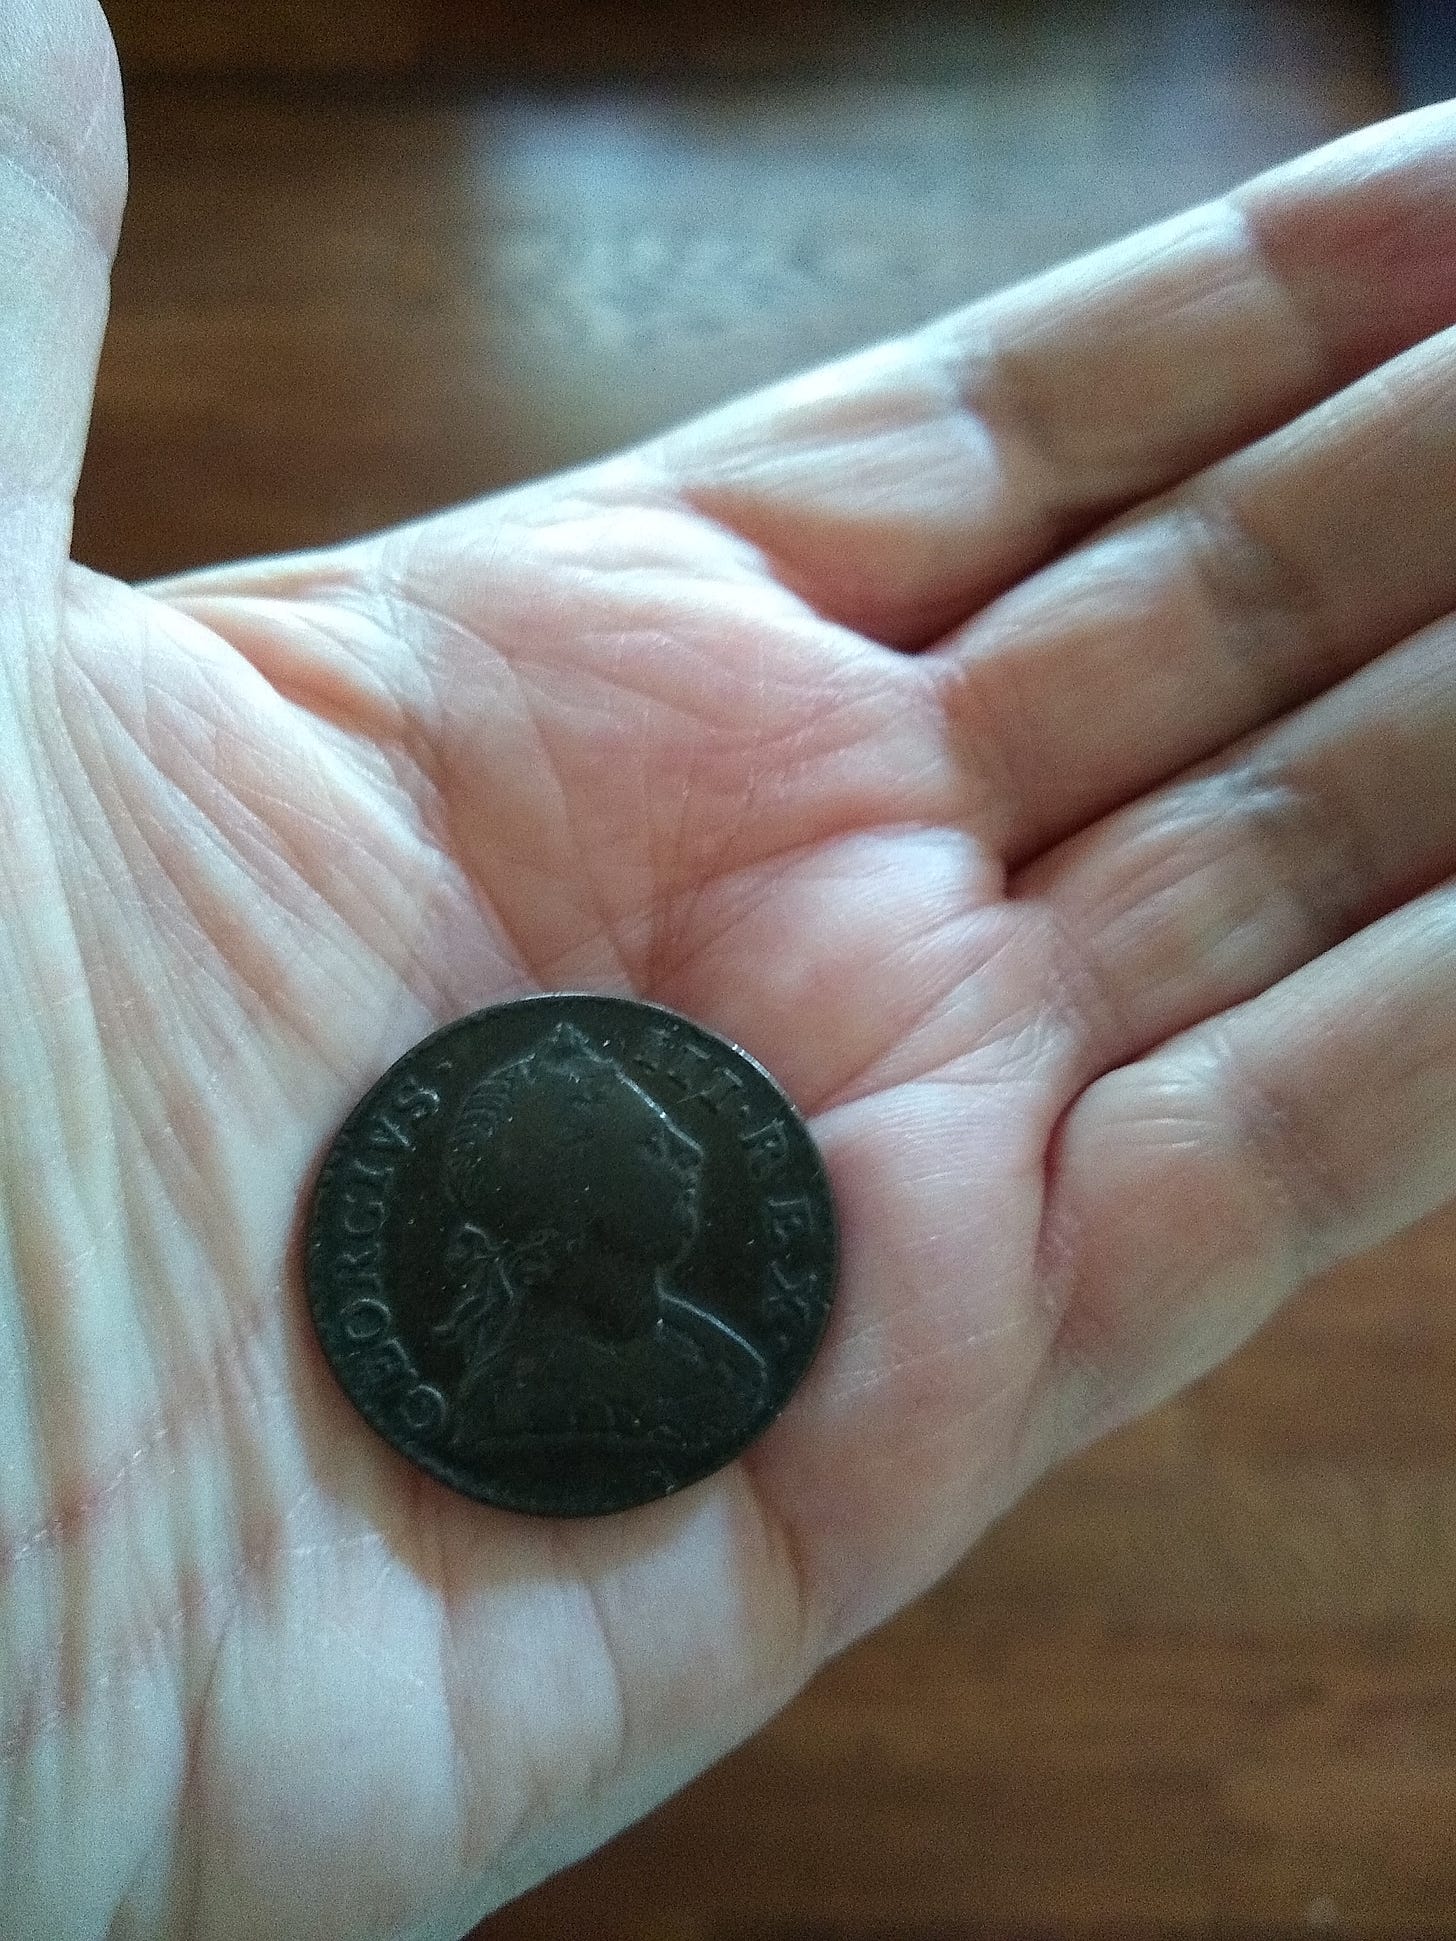 Coin lying on extended hand